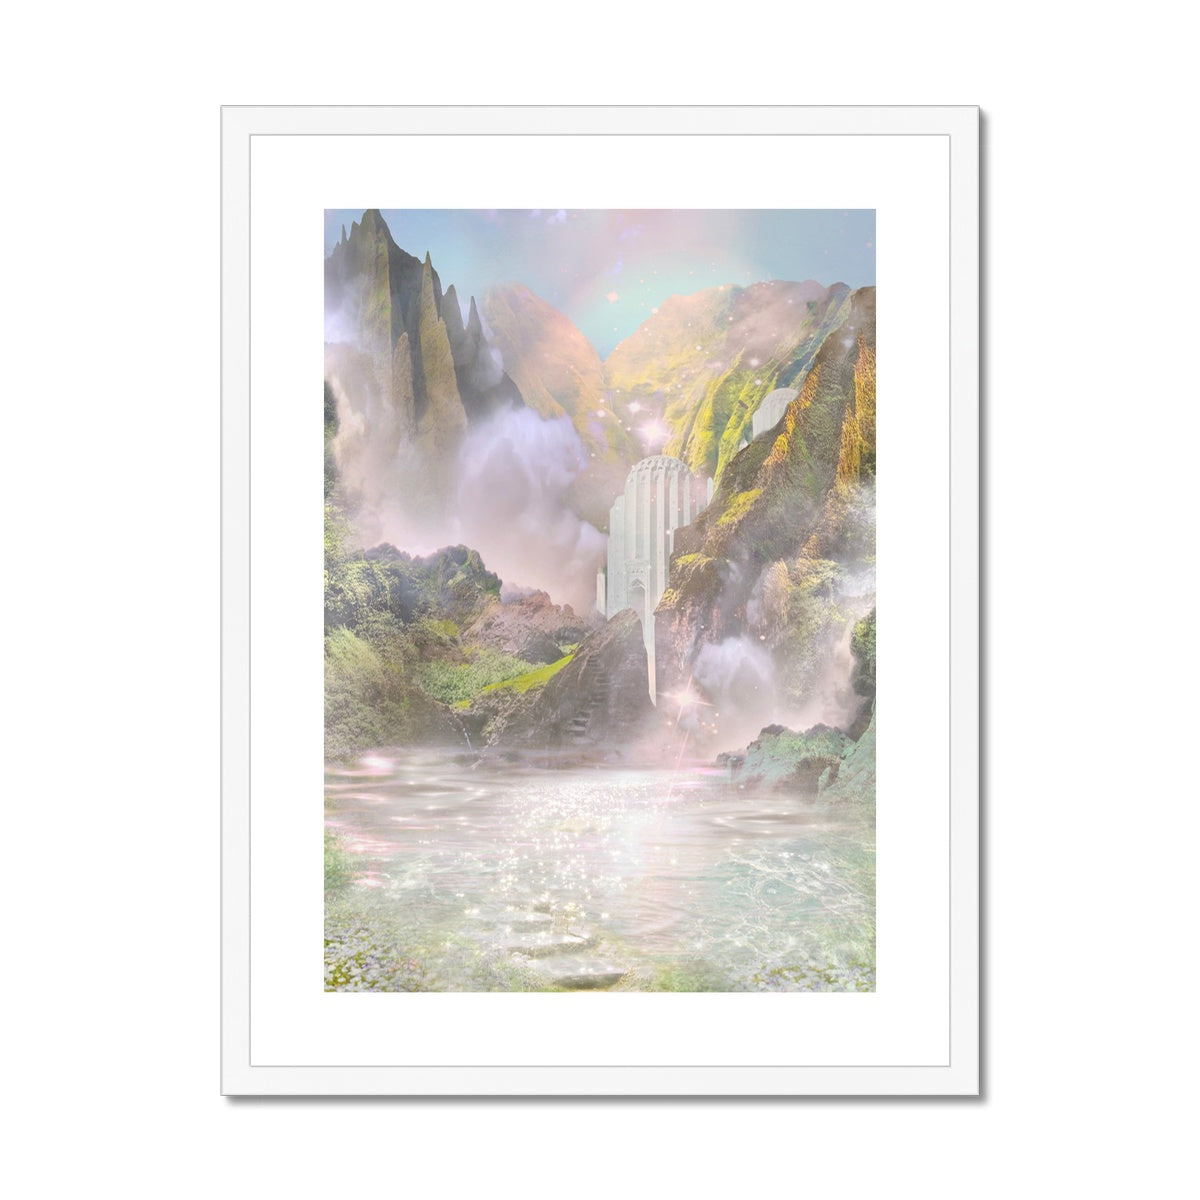 Beyond the Veil Framed & Mounted Print - Starseed Designs Inc.